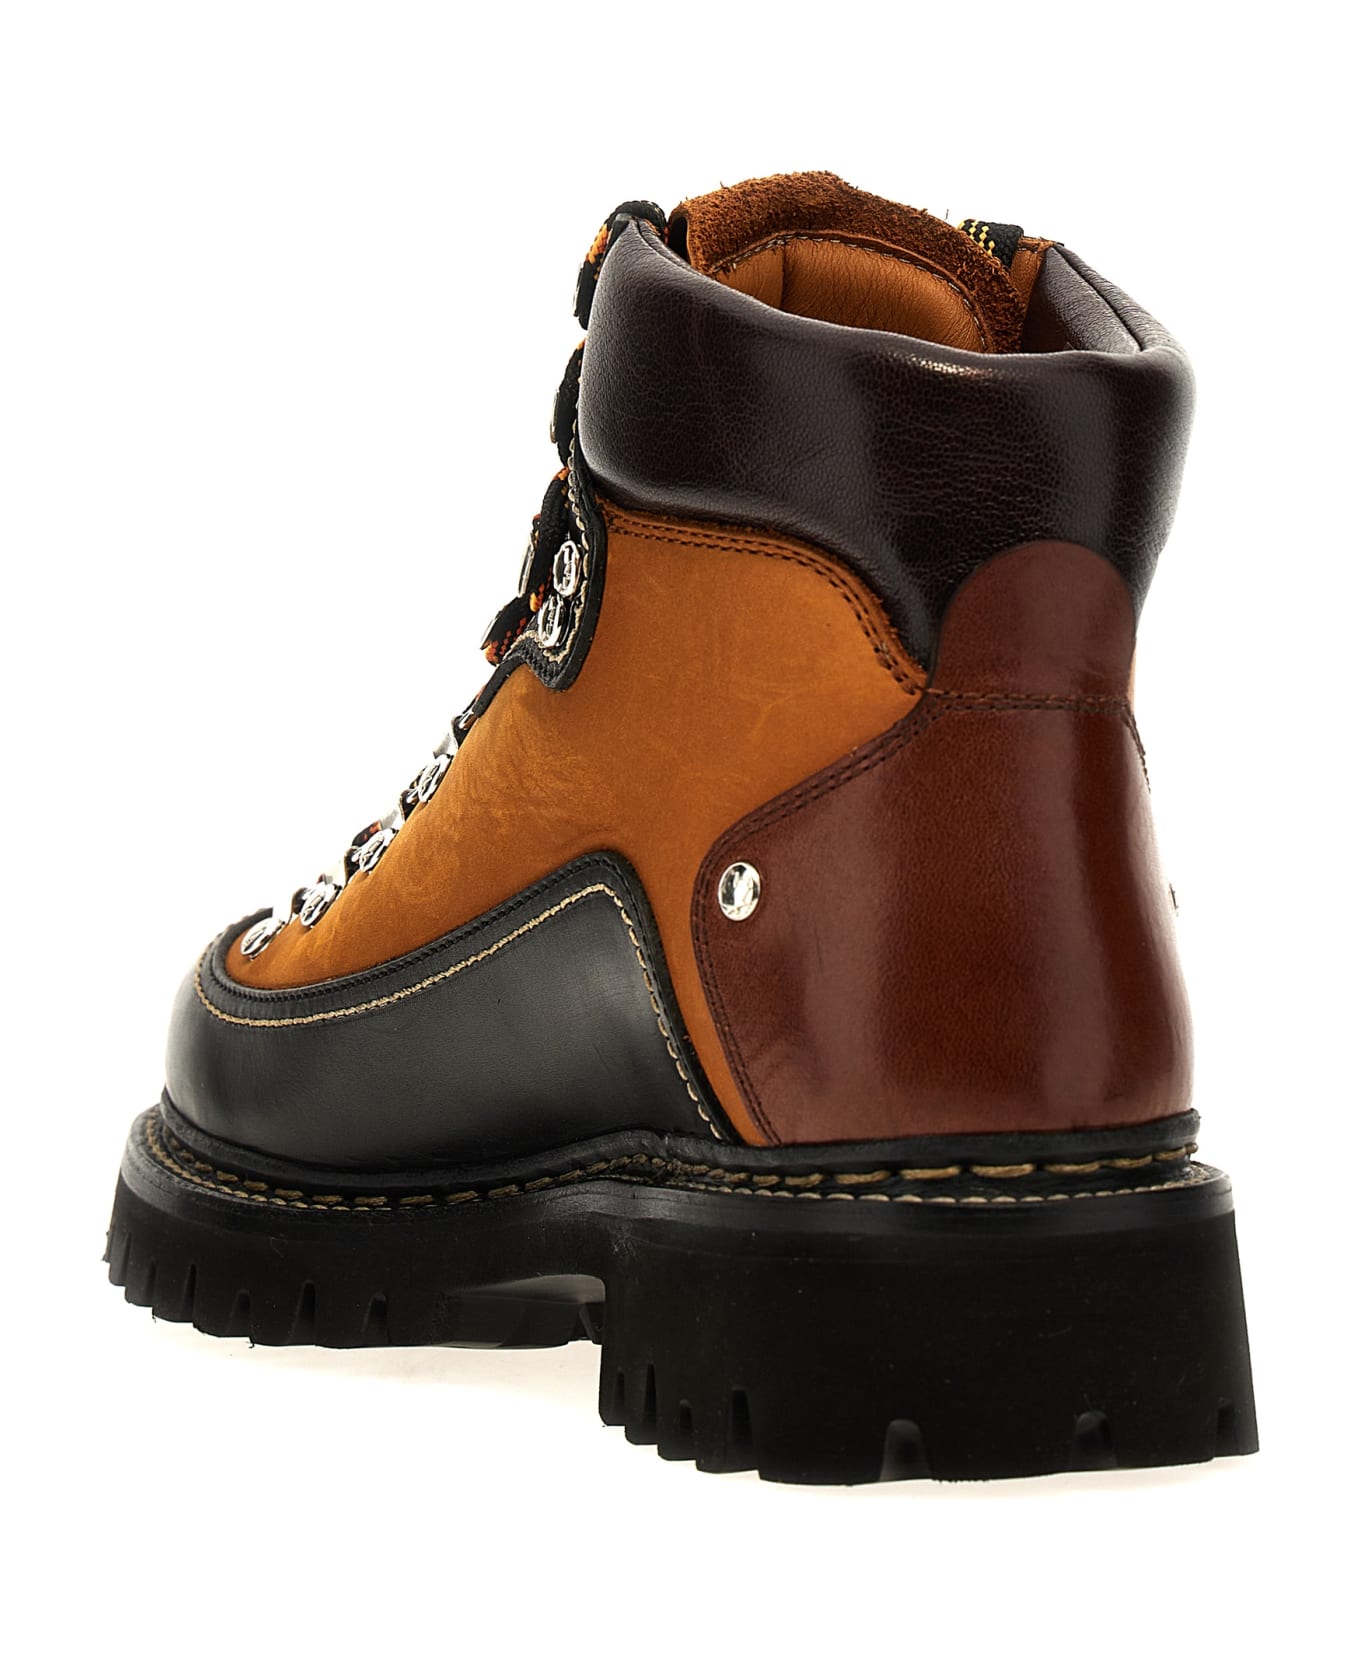 Dsquared2 Canadian Hiking Boots - Brown ブーツ